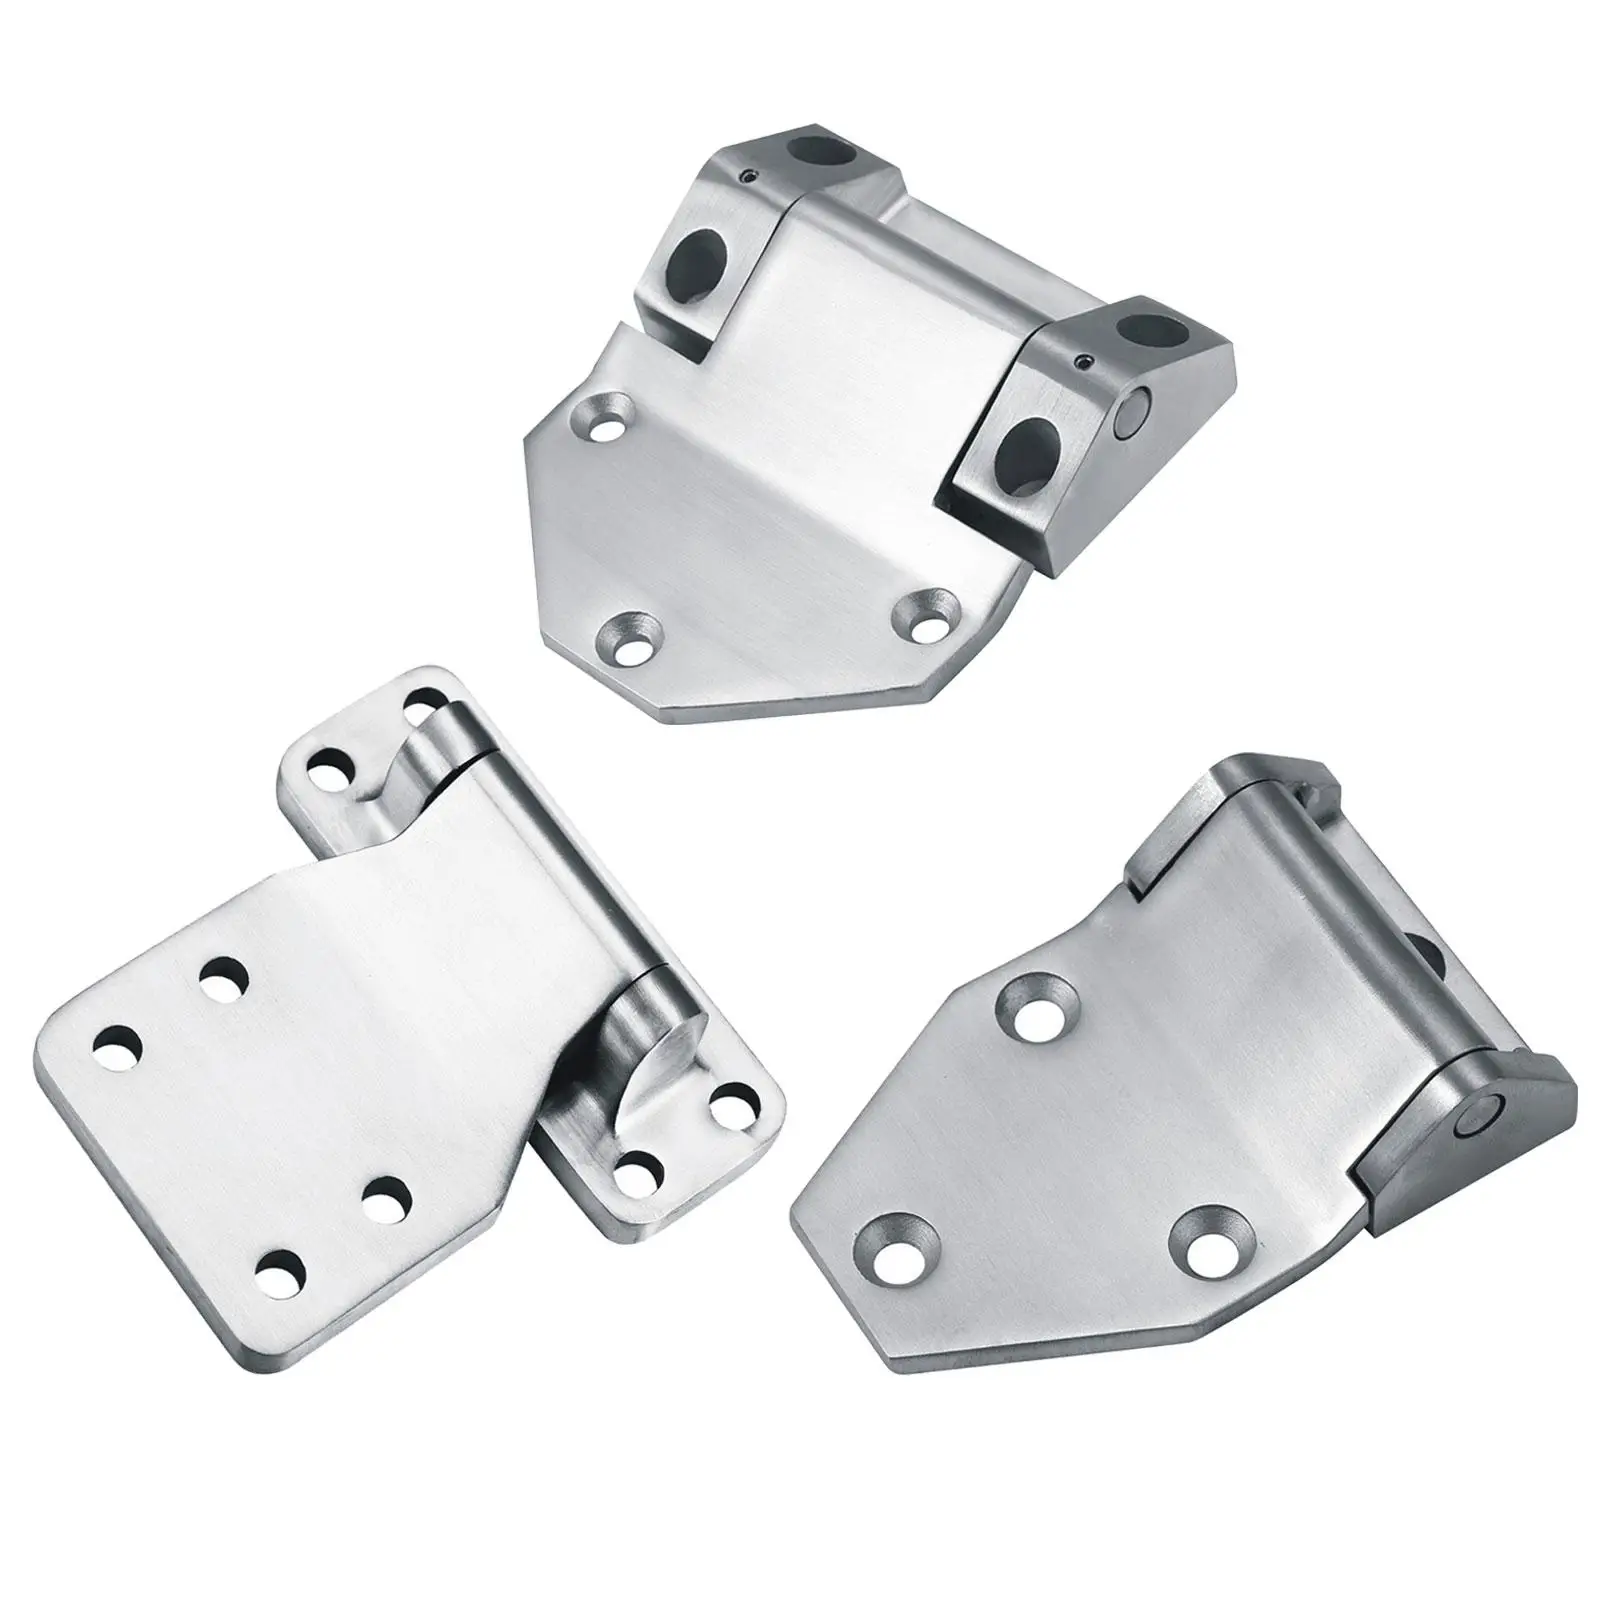 304 Stainless Steel Door Hinges Hardware Barn Hinges Replacement Parts Door Fittings for Gate Kitchen Wardrobe Rvs Furniture